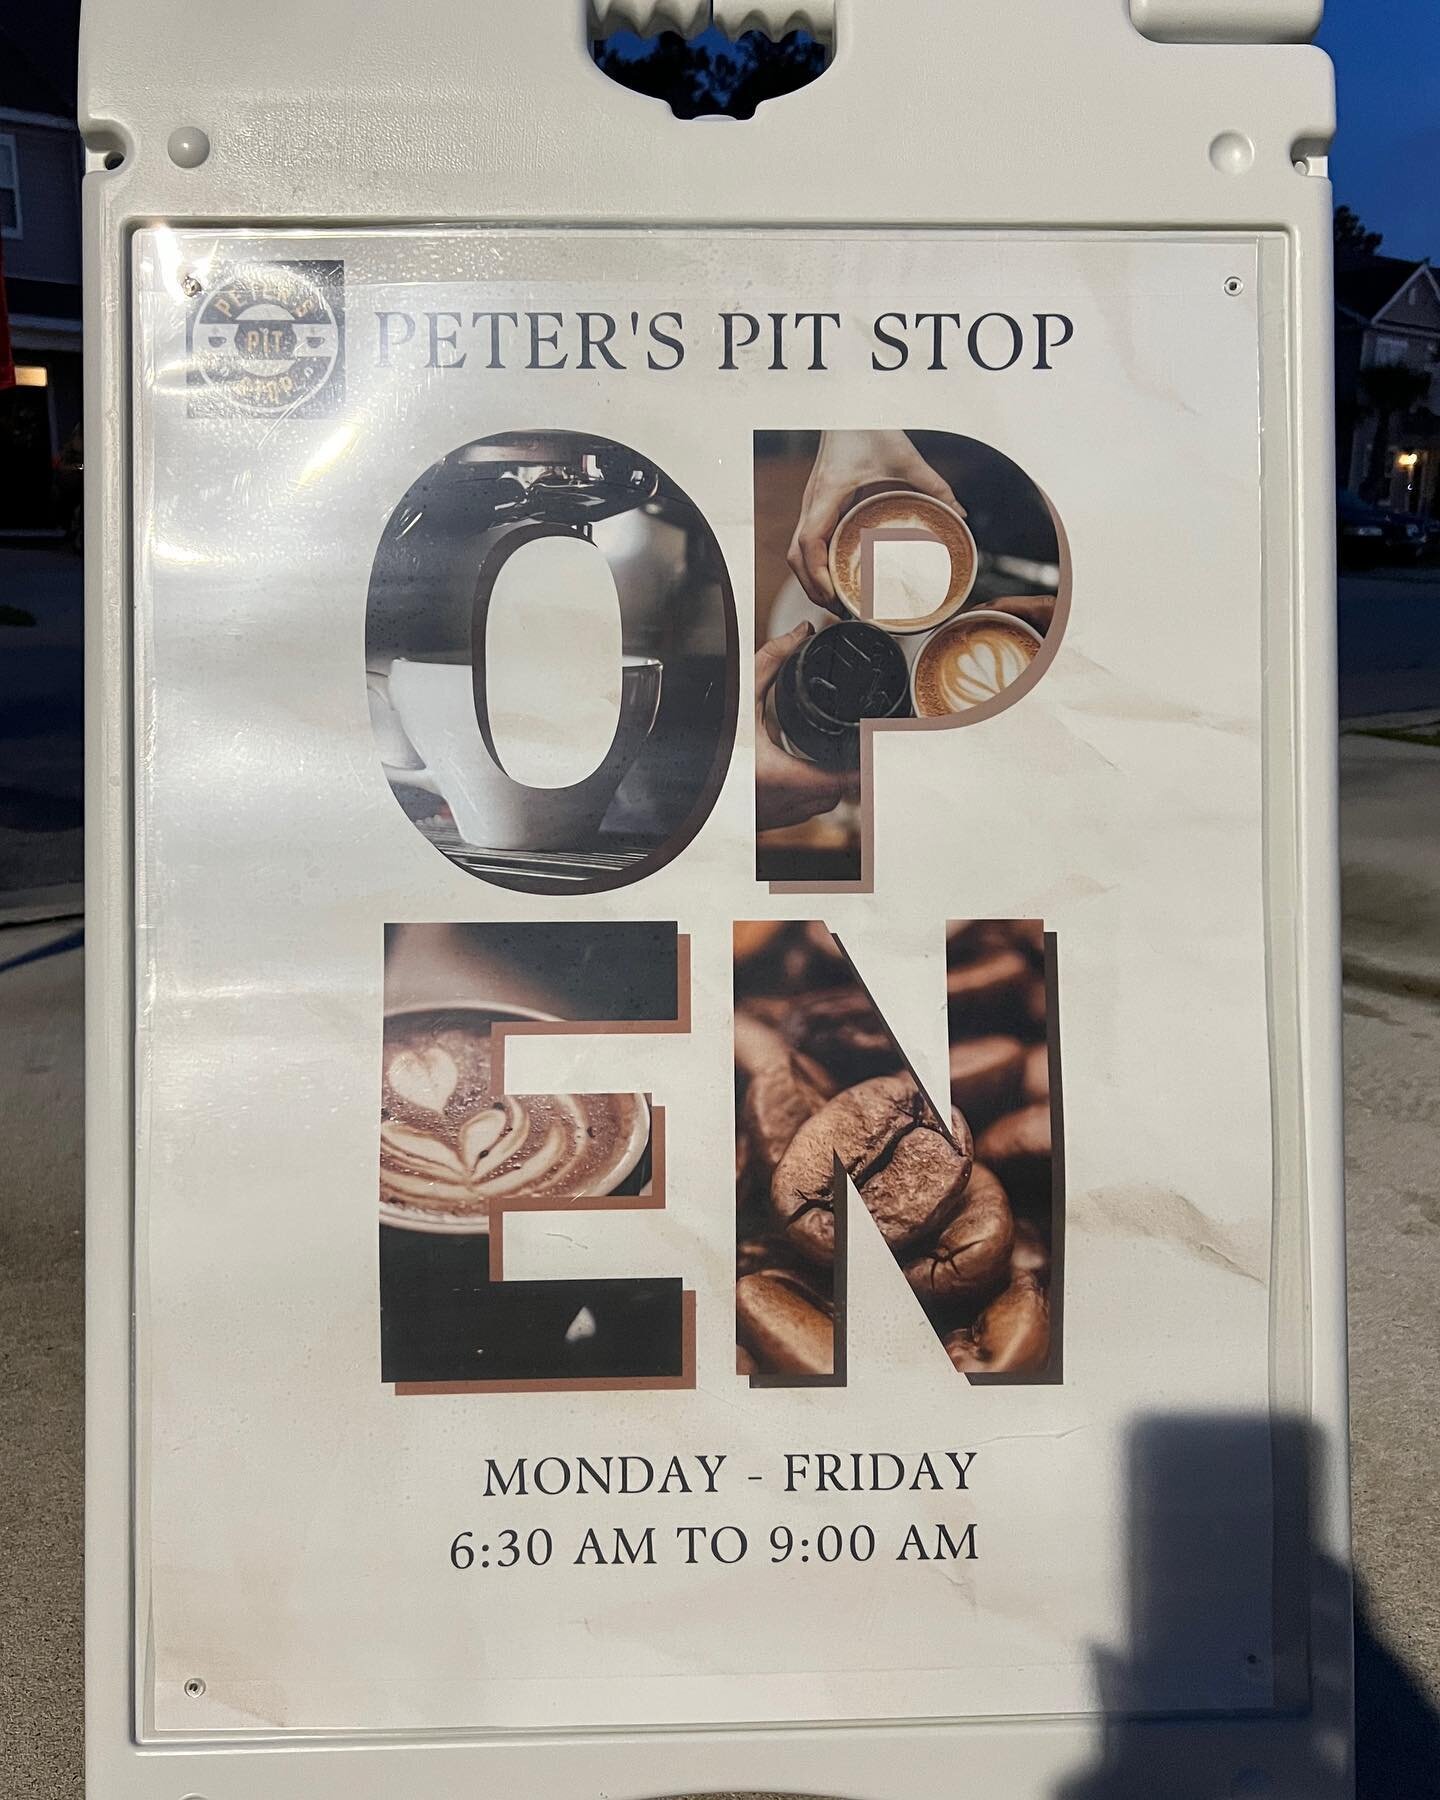 Hope everyone had a great Labor Day holiday. Peter&rsquo;s Pit Stop is open and ready to serve you! #PetersPitStop
#Meridianatlakesofcanebay
#Canebayplantation
#icecoffee
#hotcoffee
#coastalcoffeeroasters
#coffeeflavors
#specialcoffeefromspecialpeopl